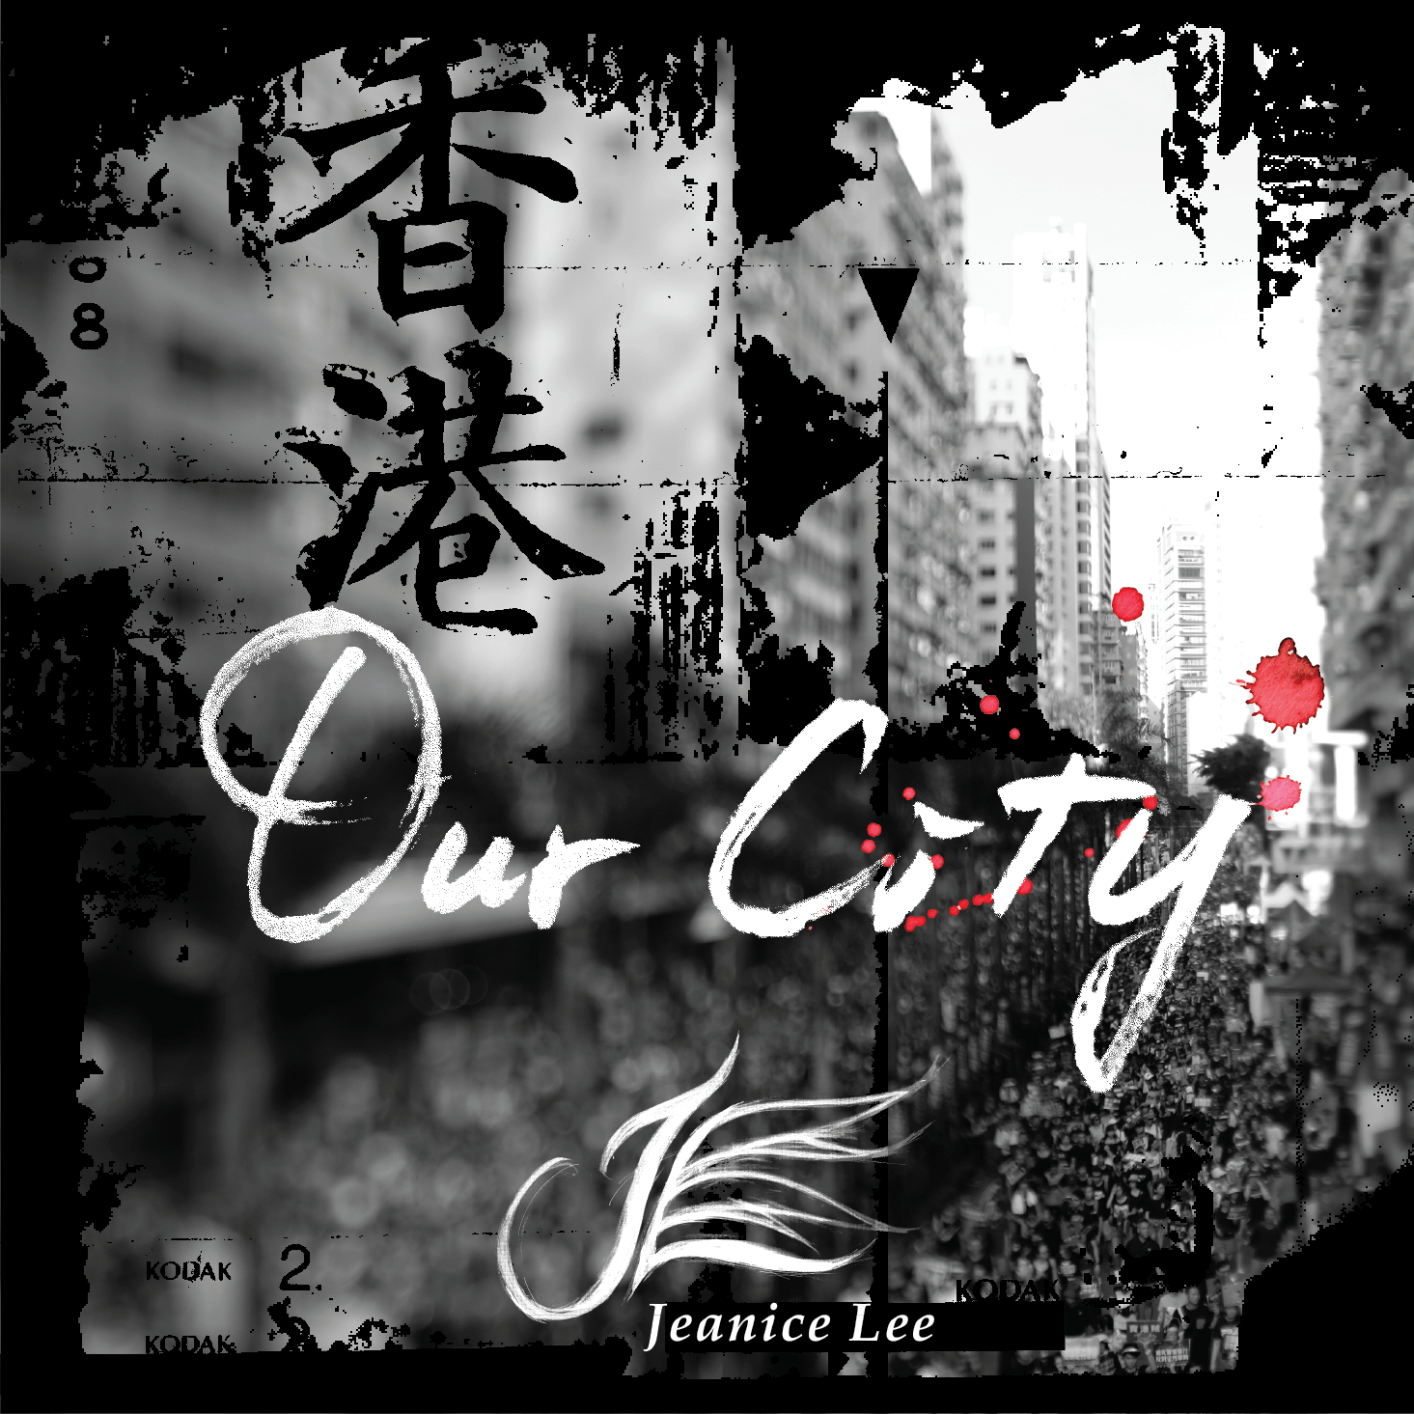 Our City - CD (single)